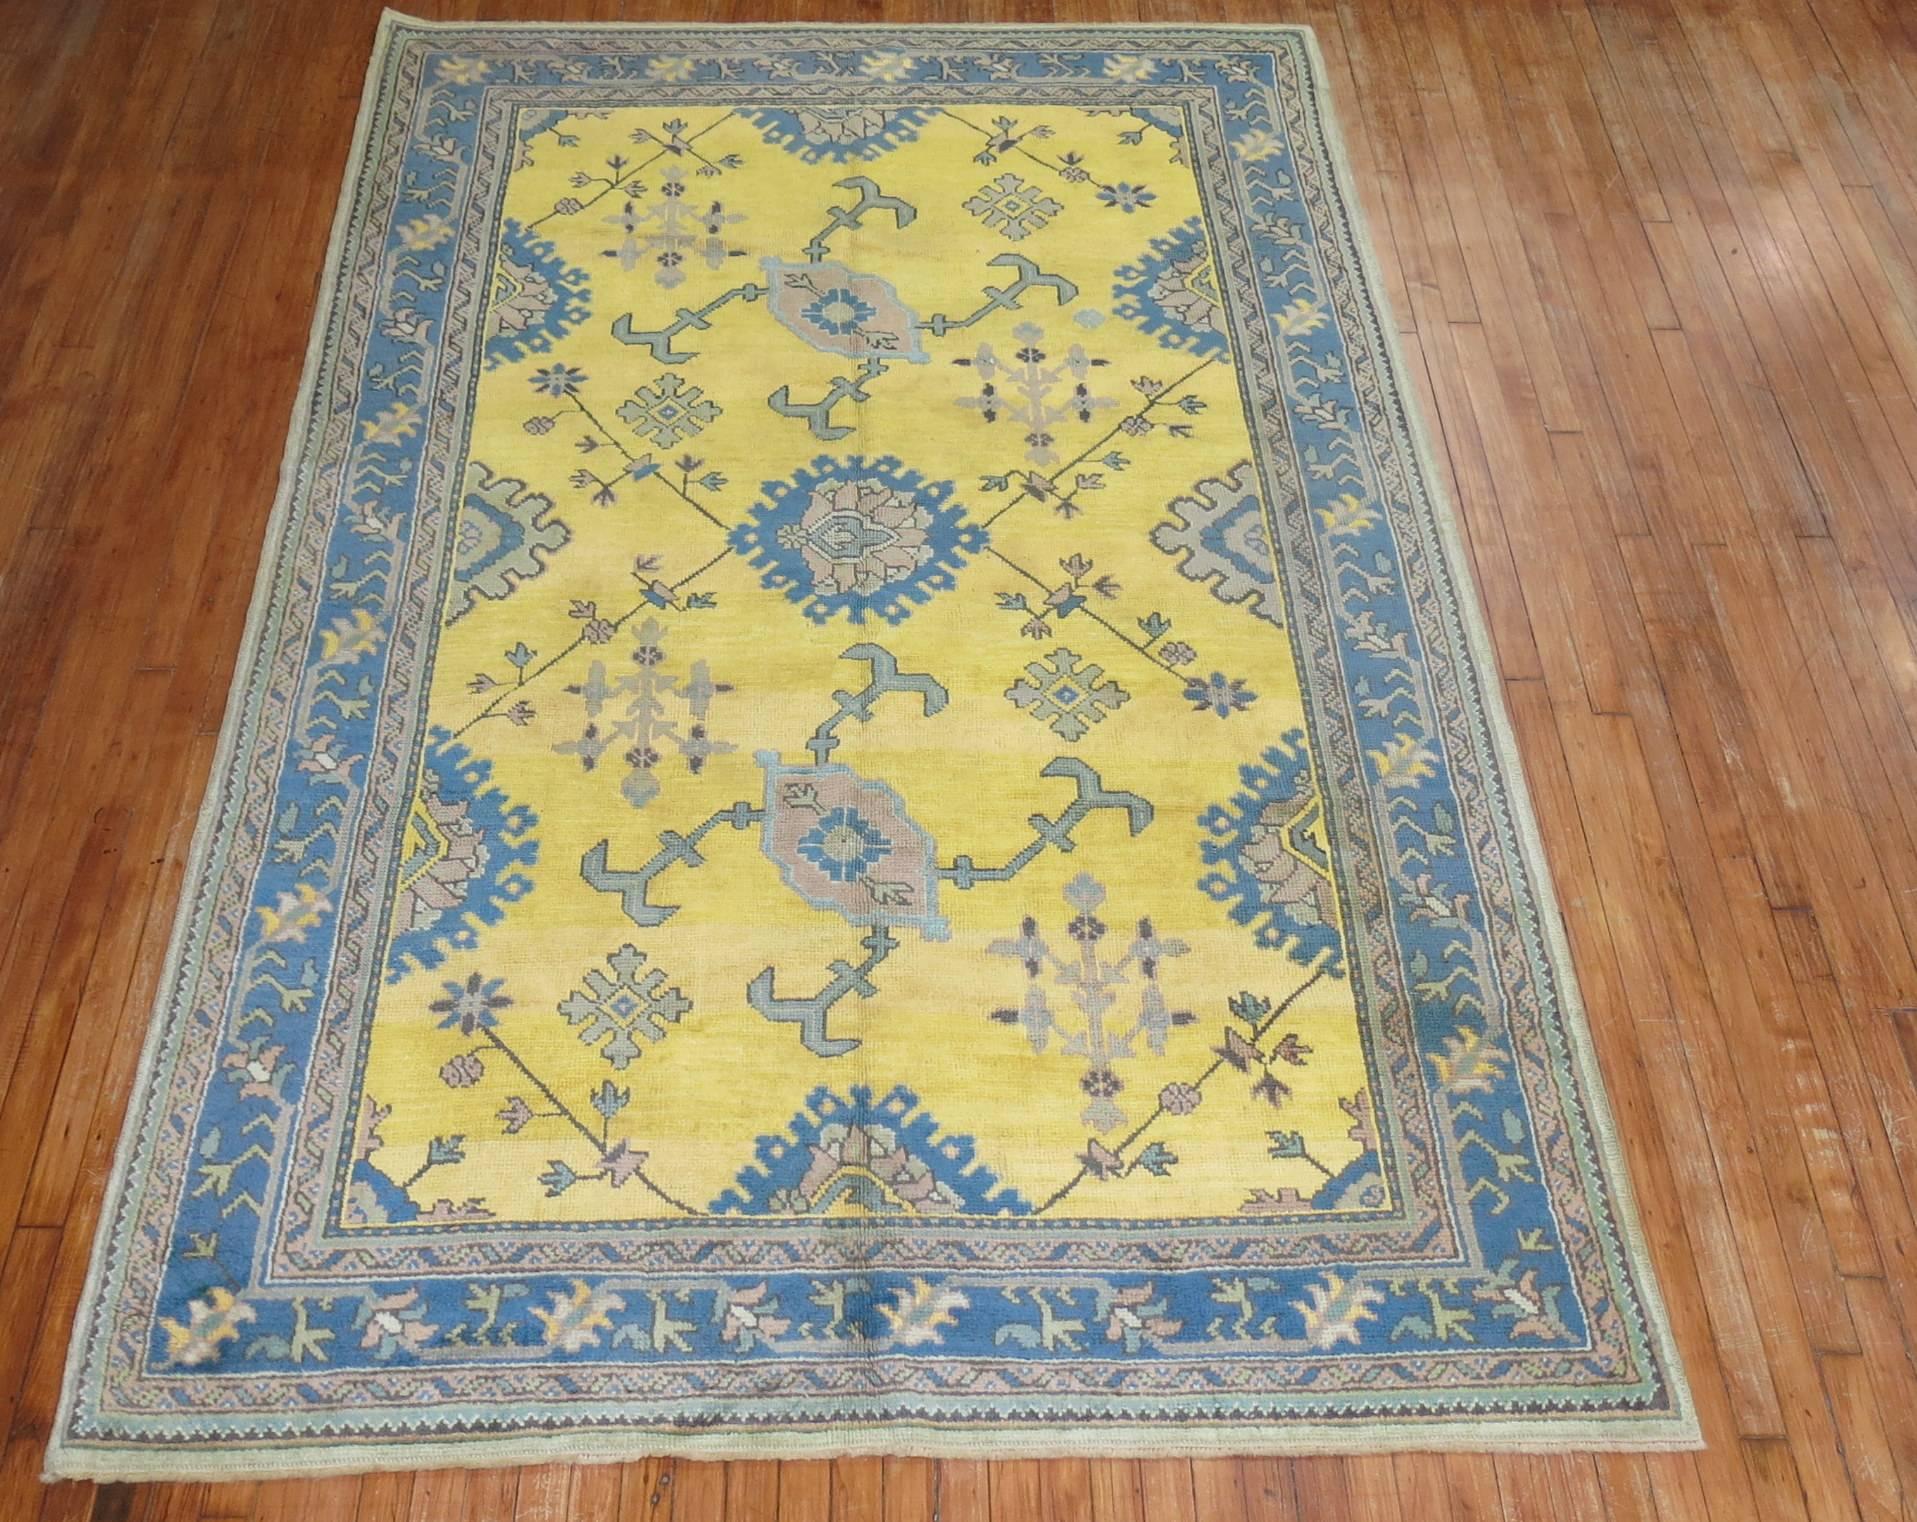 An antique Turkish Oushak with an unusual bright sunny yellow ground outlined by teal border.

Measure: 6'1